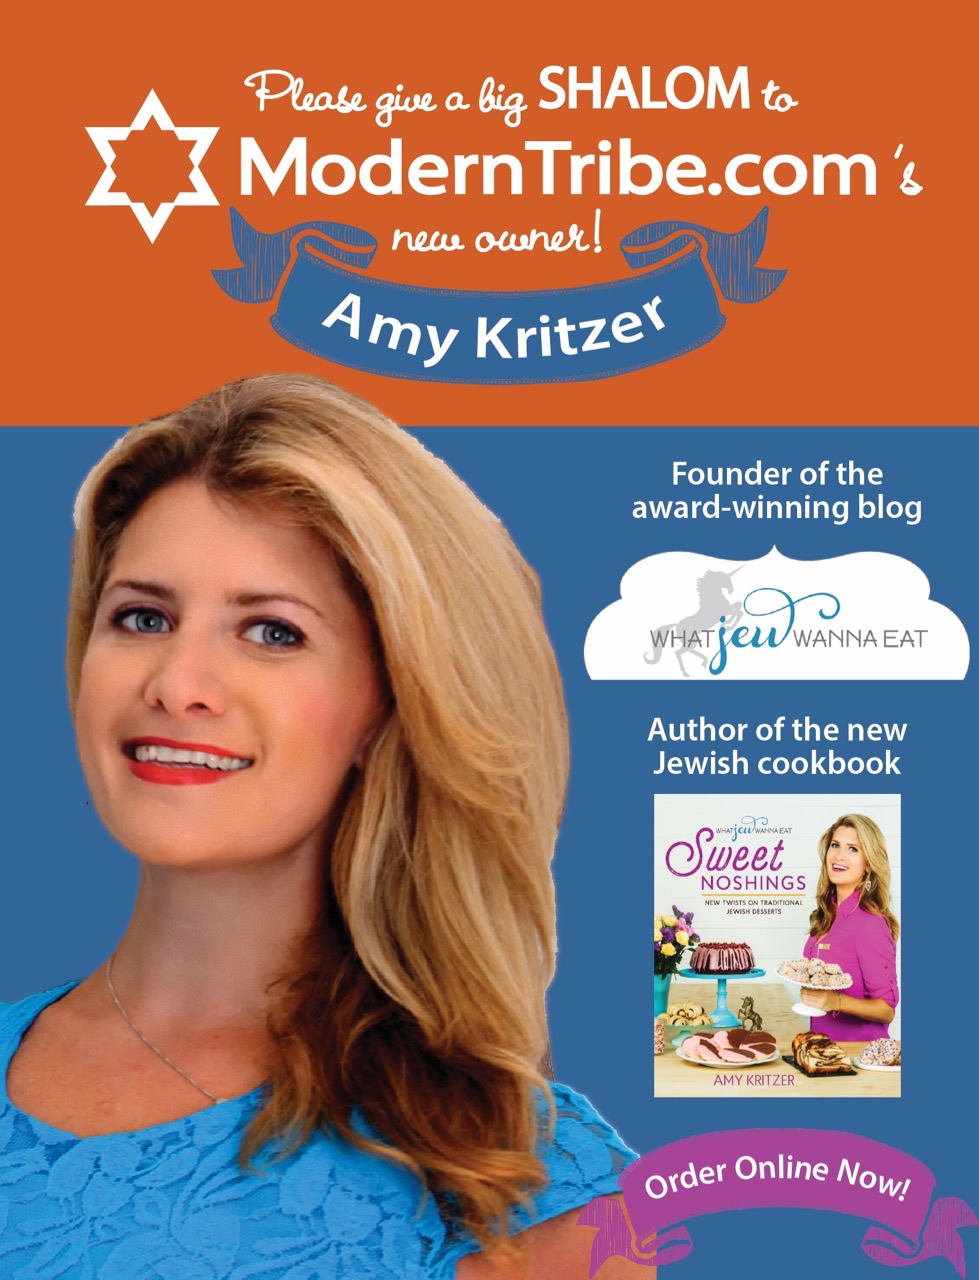 Amy Kritzer, New Owner of ModernTribe.com